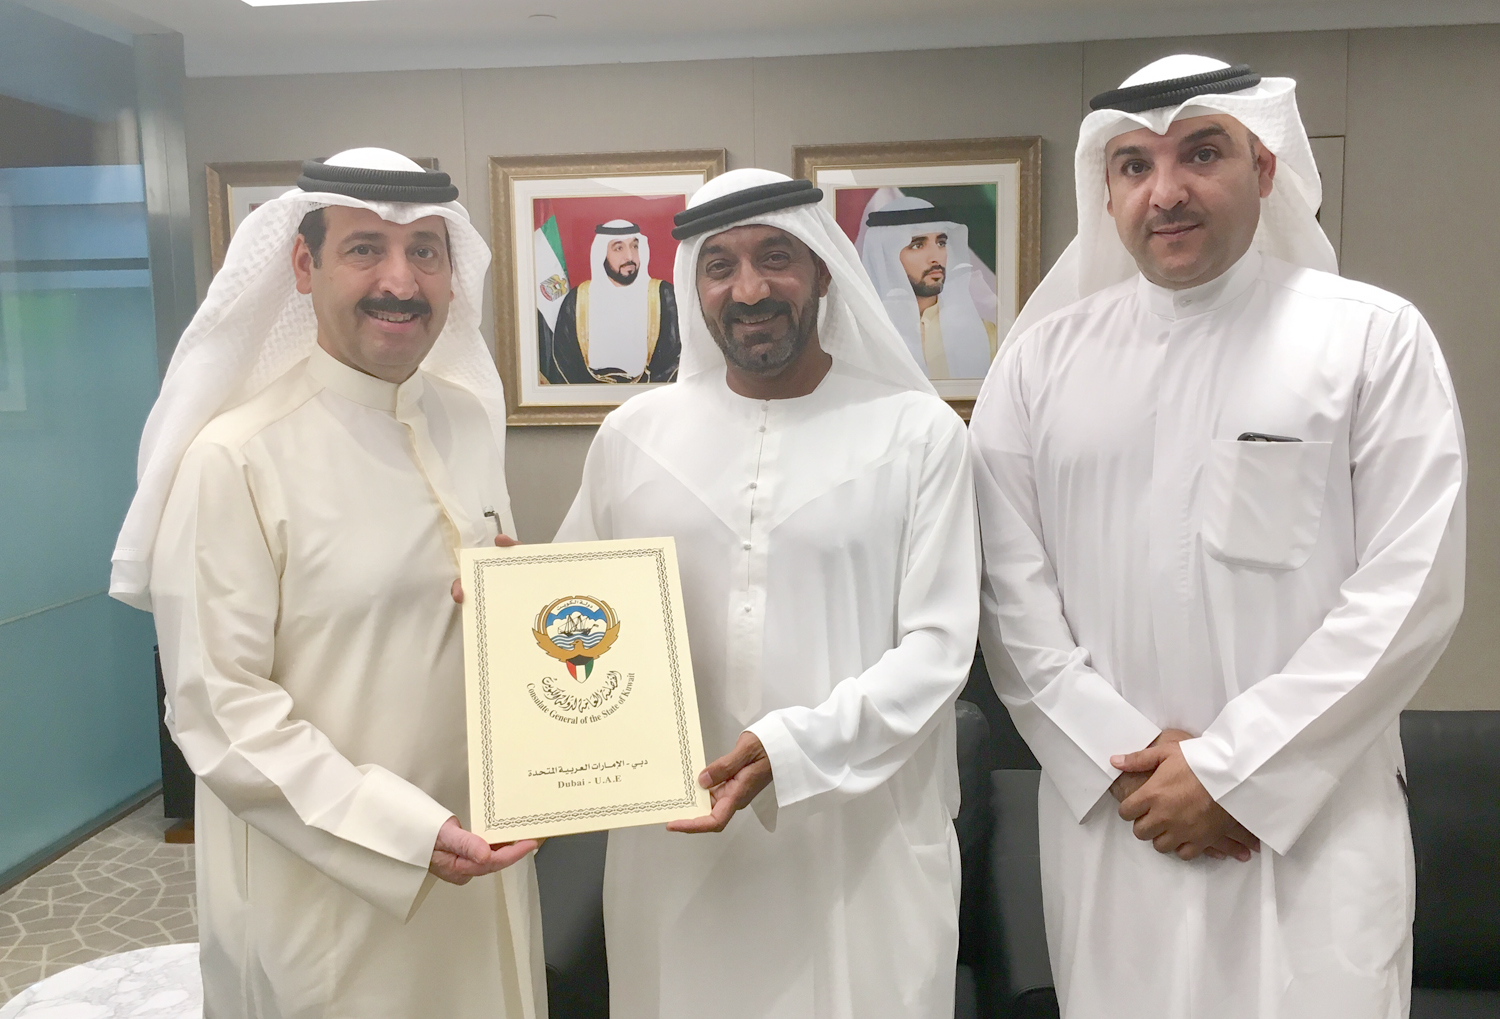 Kuwait Consul General in Dubai and UAE's Northern Emirates Theyab Al-Rashidi delivers its participation paper in the international fair" Expo 2020" Chairman of the Expo 2020 Dubai's Higher Committee Sheikh Ahmad Bin Saeed Al Maktoum